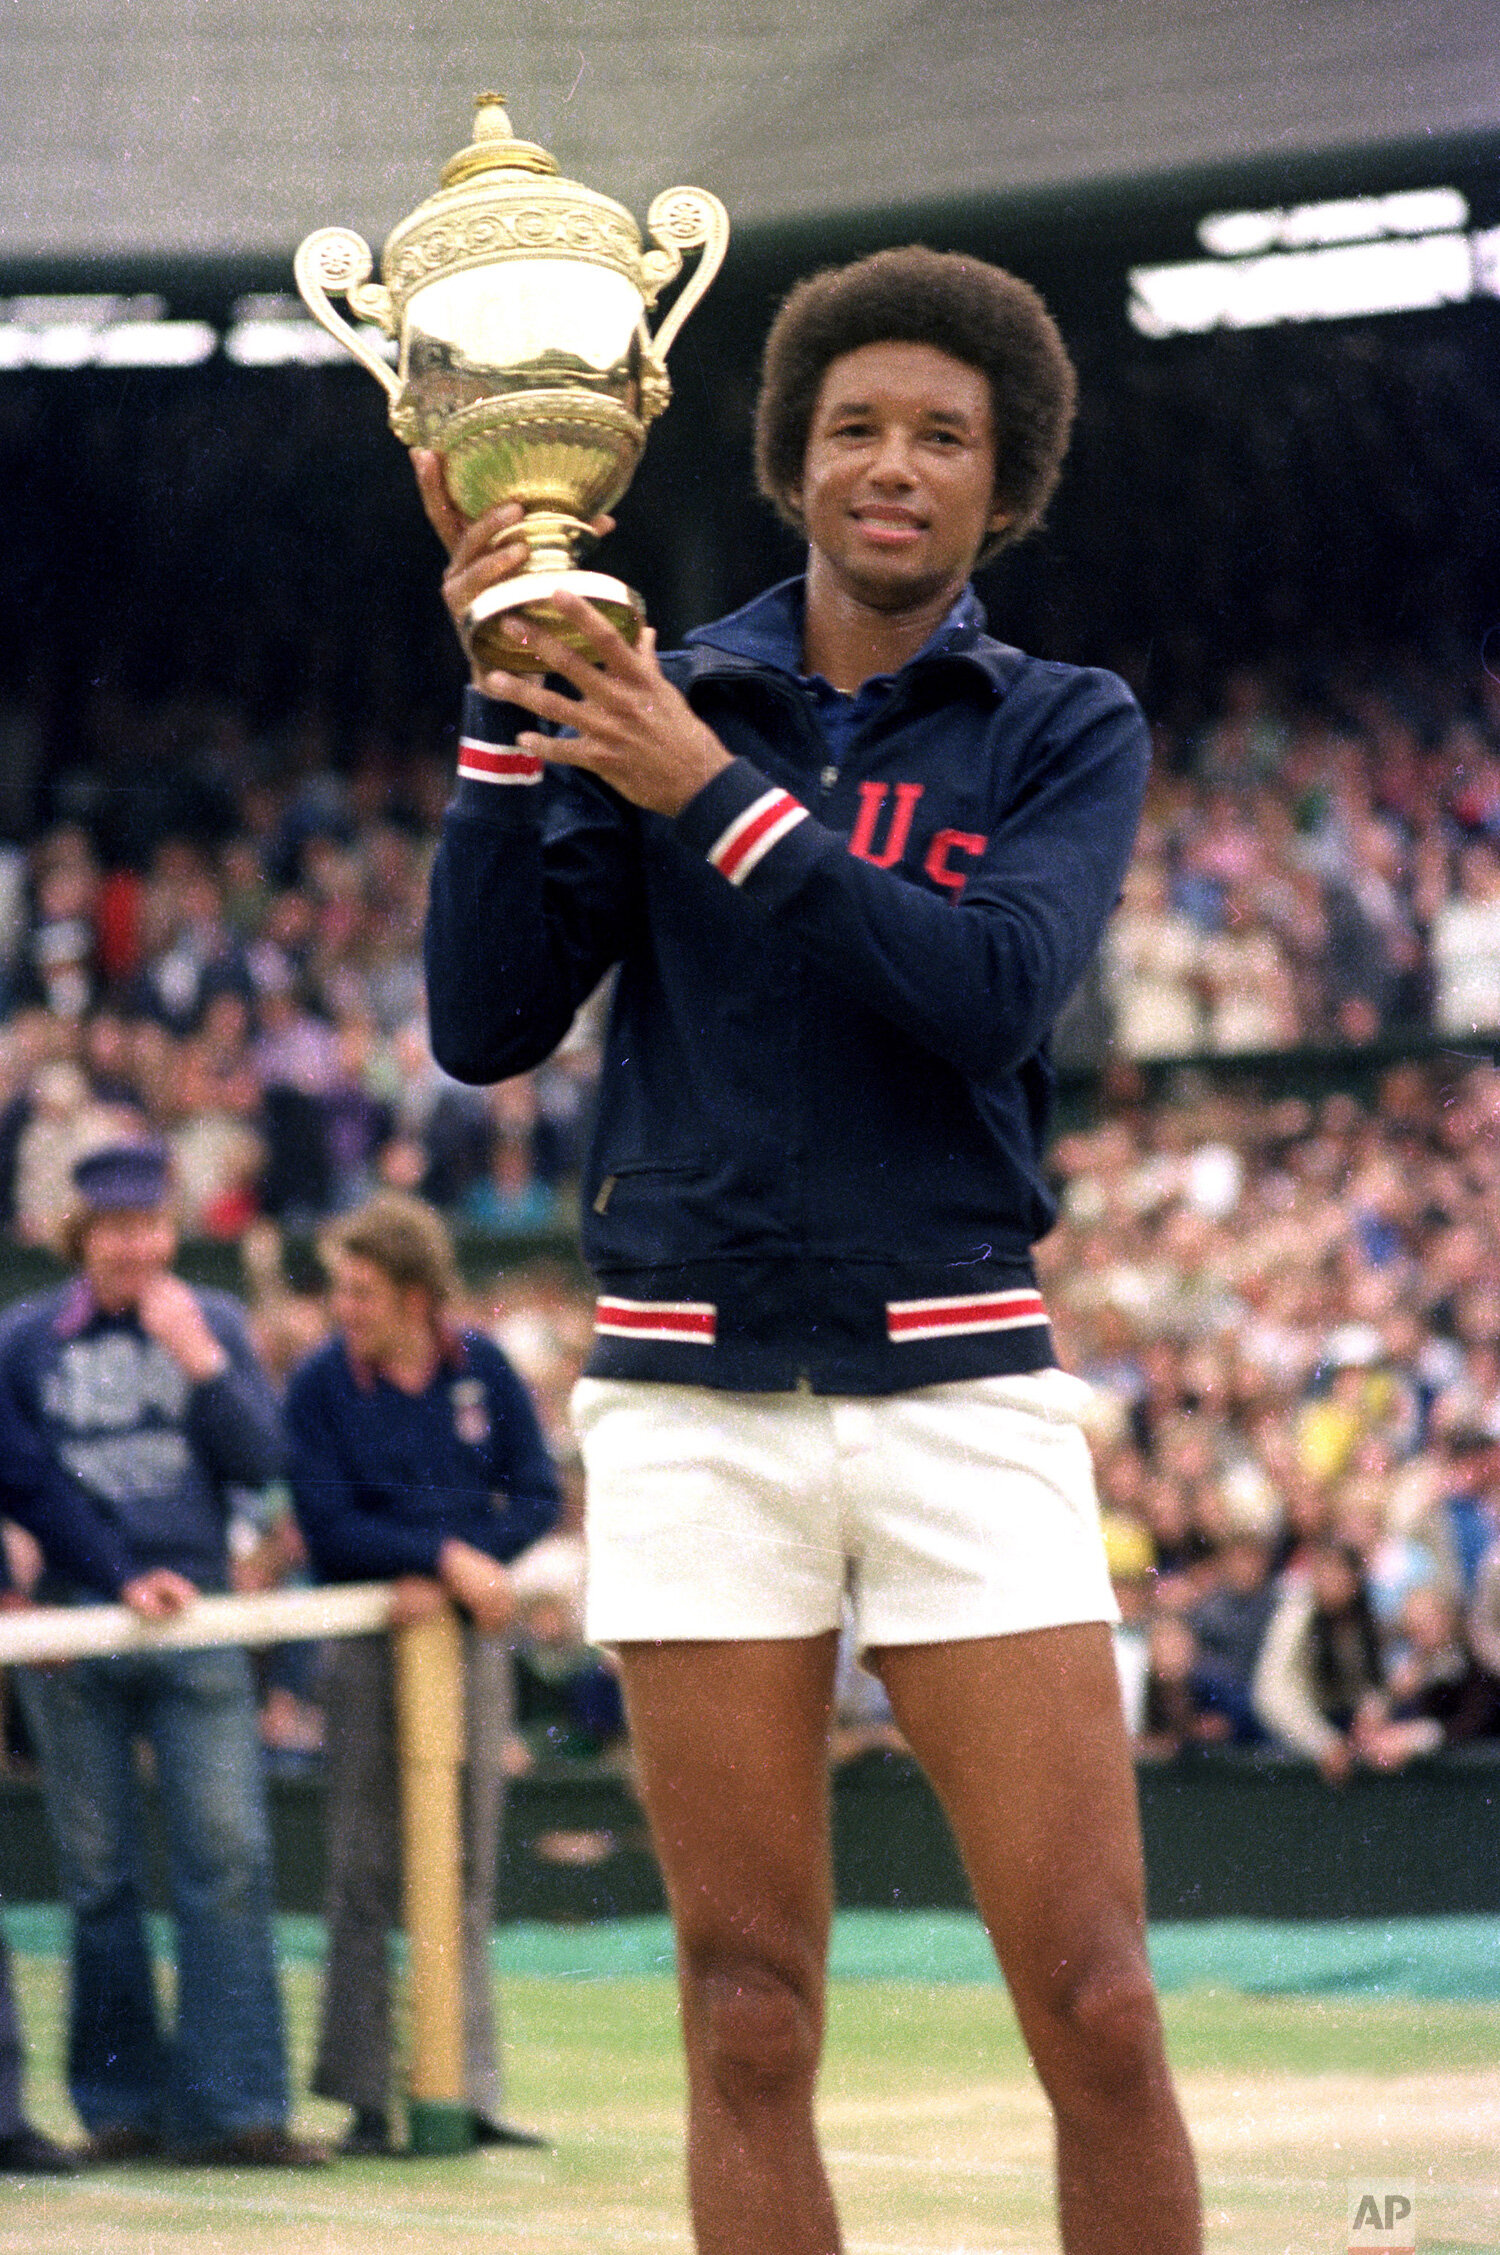  Arthur Ashe holds his Wimbledon trophy cup after defeating fellow American Jimmy Connors in the final match of the men's singles championship at the All England Lawn Tennis Championship in Wimbledon, England, July 5, 1975. (AP Photo) 